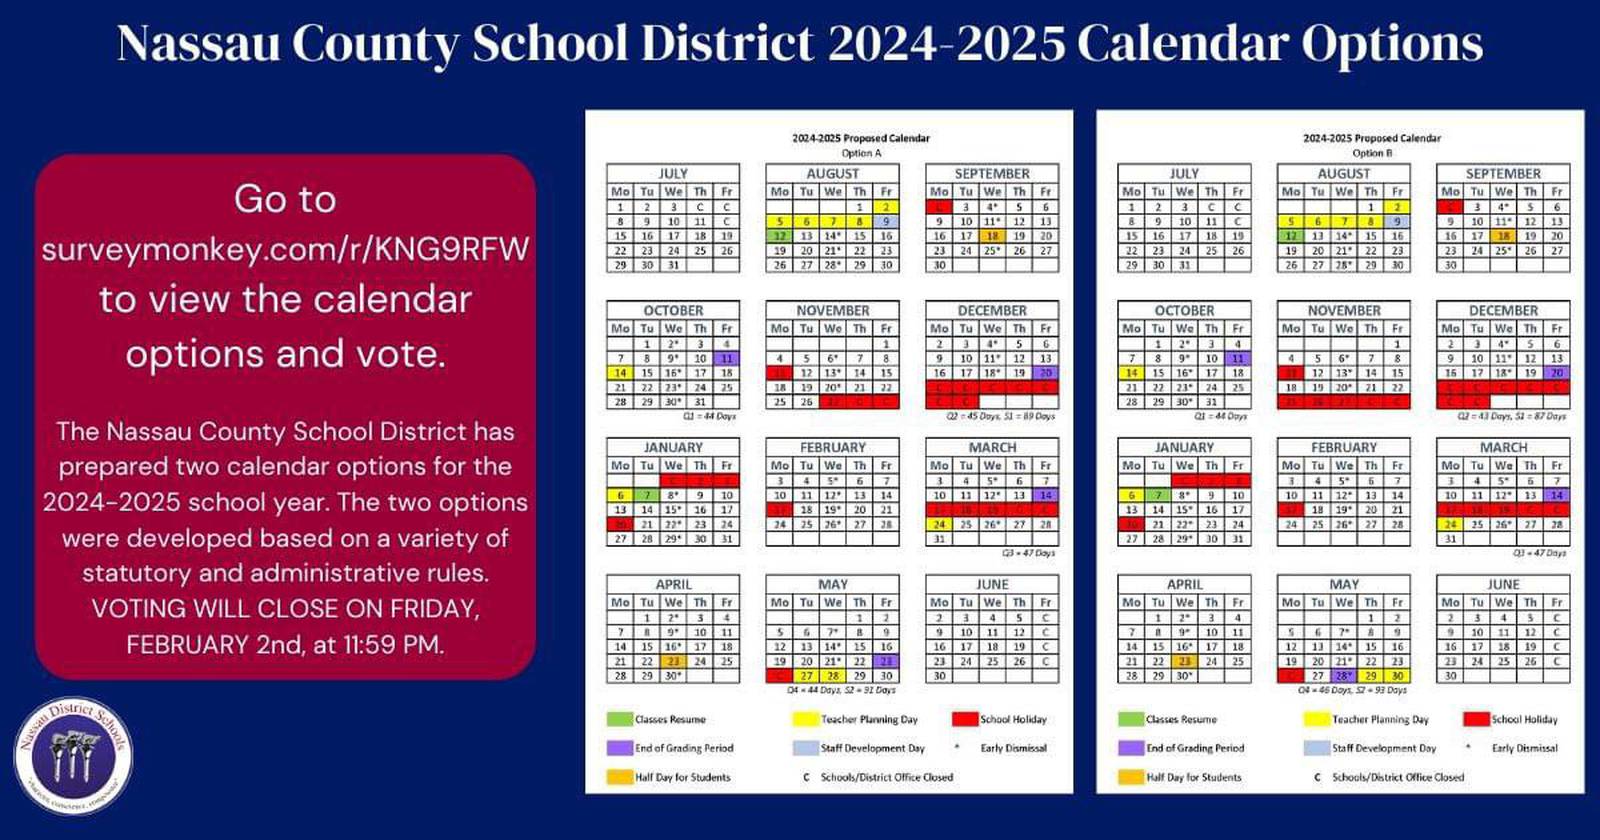 Nassau County Schools wants parents to vote on their favorite 20242025